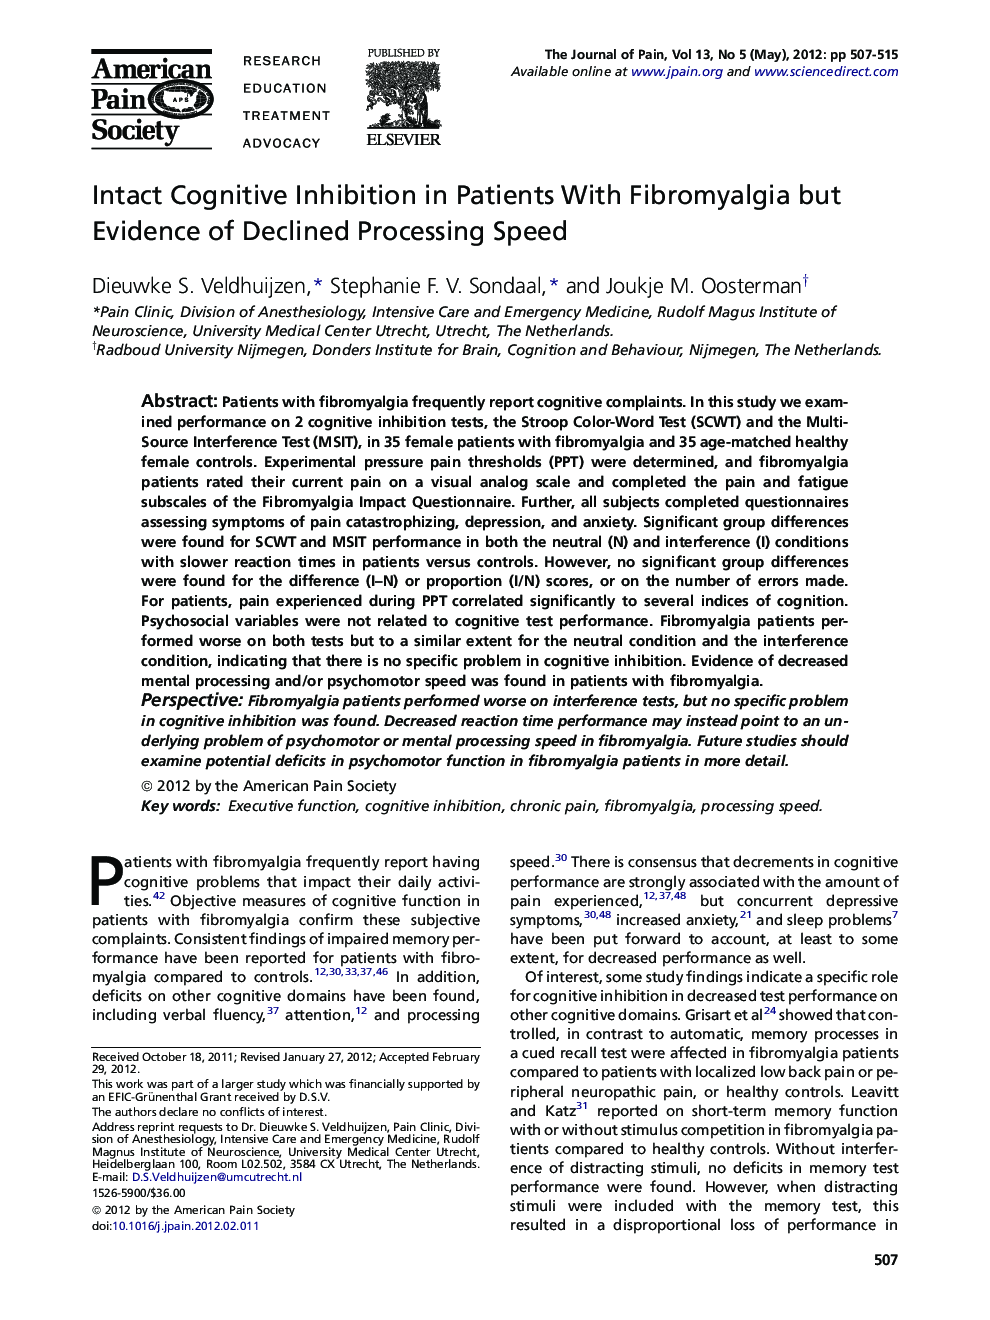 Intact Cognitive Inhibition in Patients With Fibromyalgia but Evidence of Declined Processing Speed 